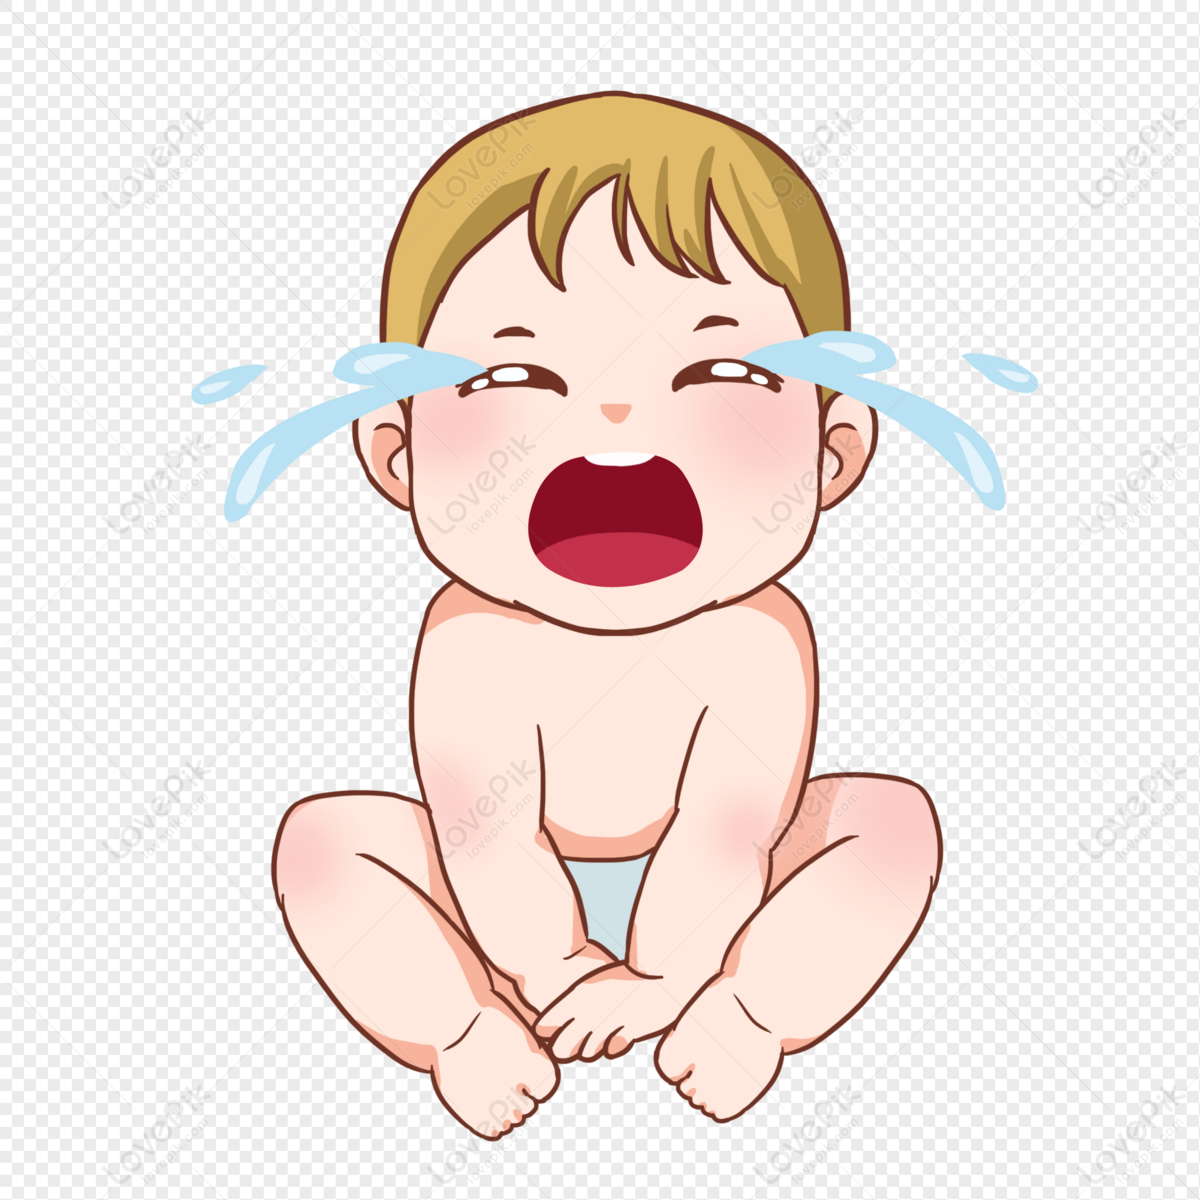 Cartoon Baby Crying Pictures PNG Hd Transparent Image And Clipart Image For  Free Download - Lovepik | 401565304